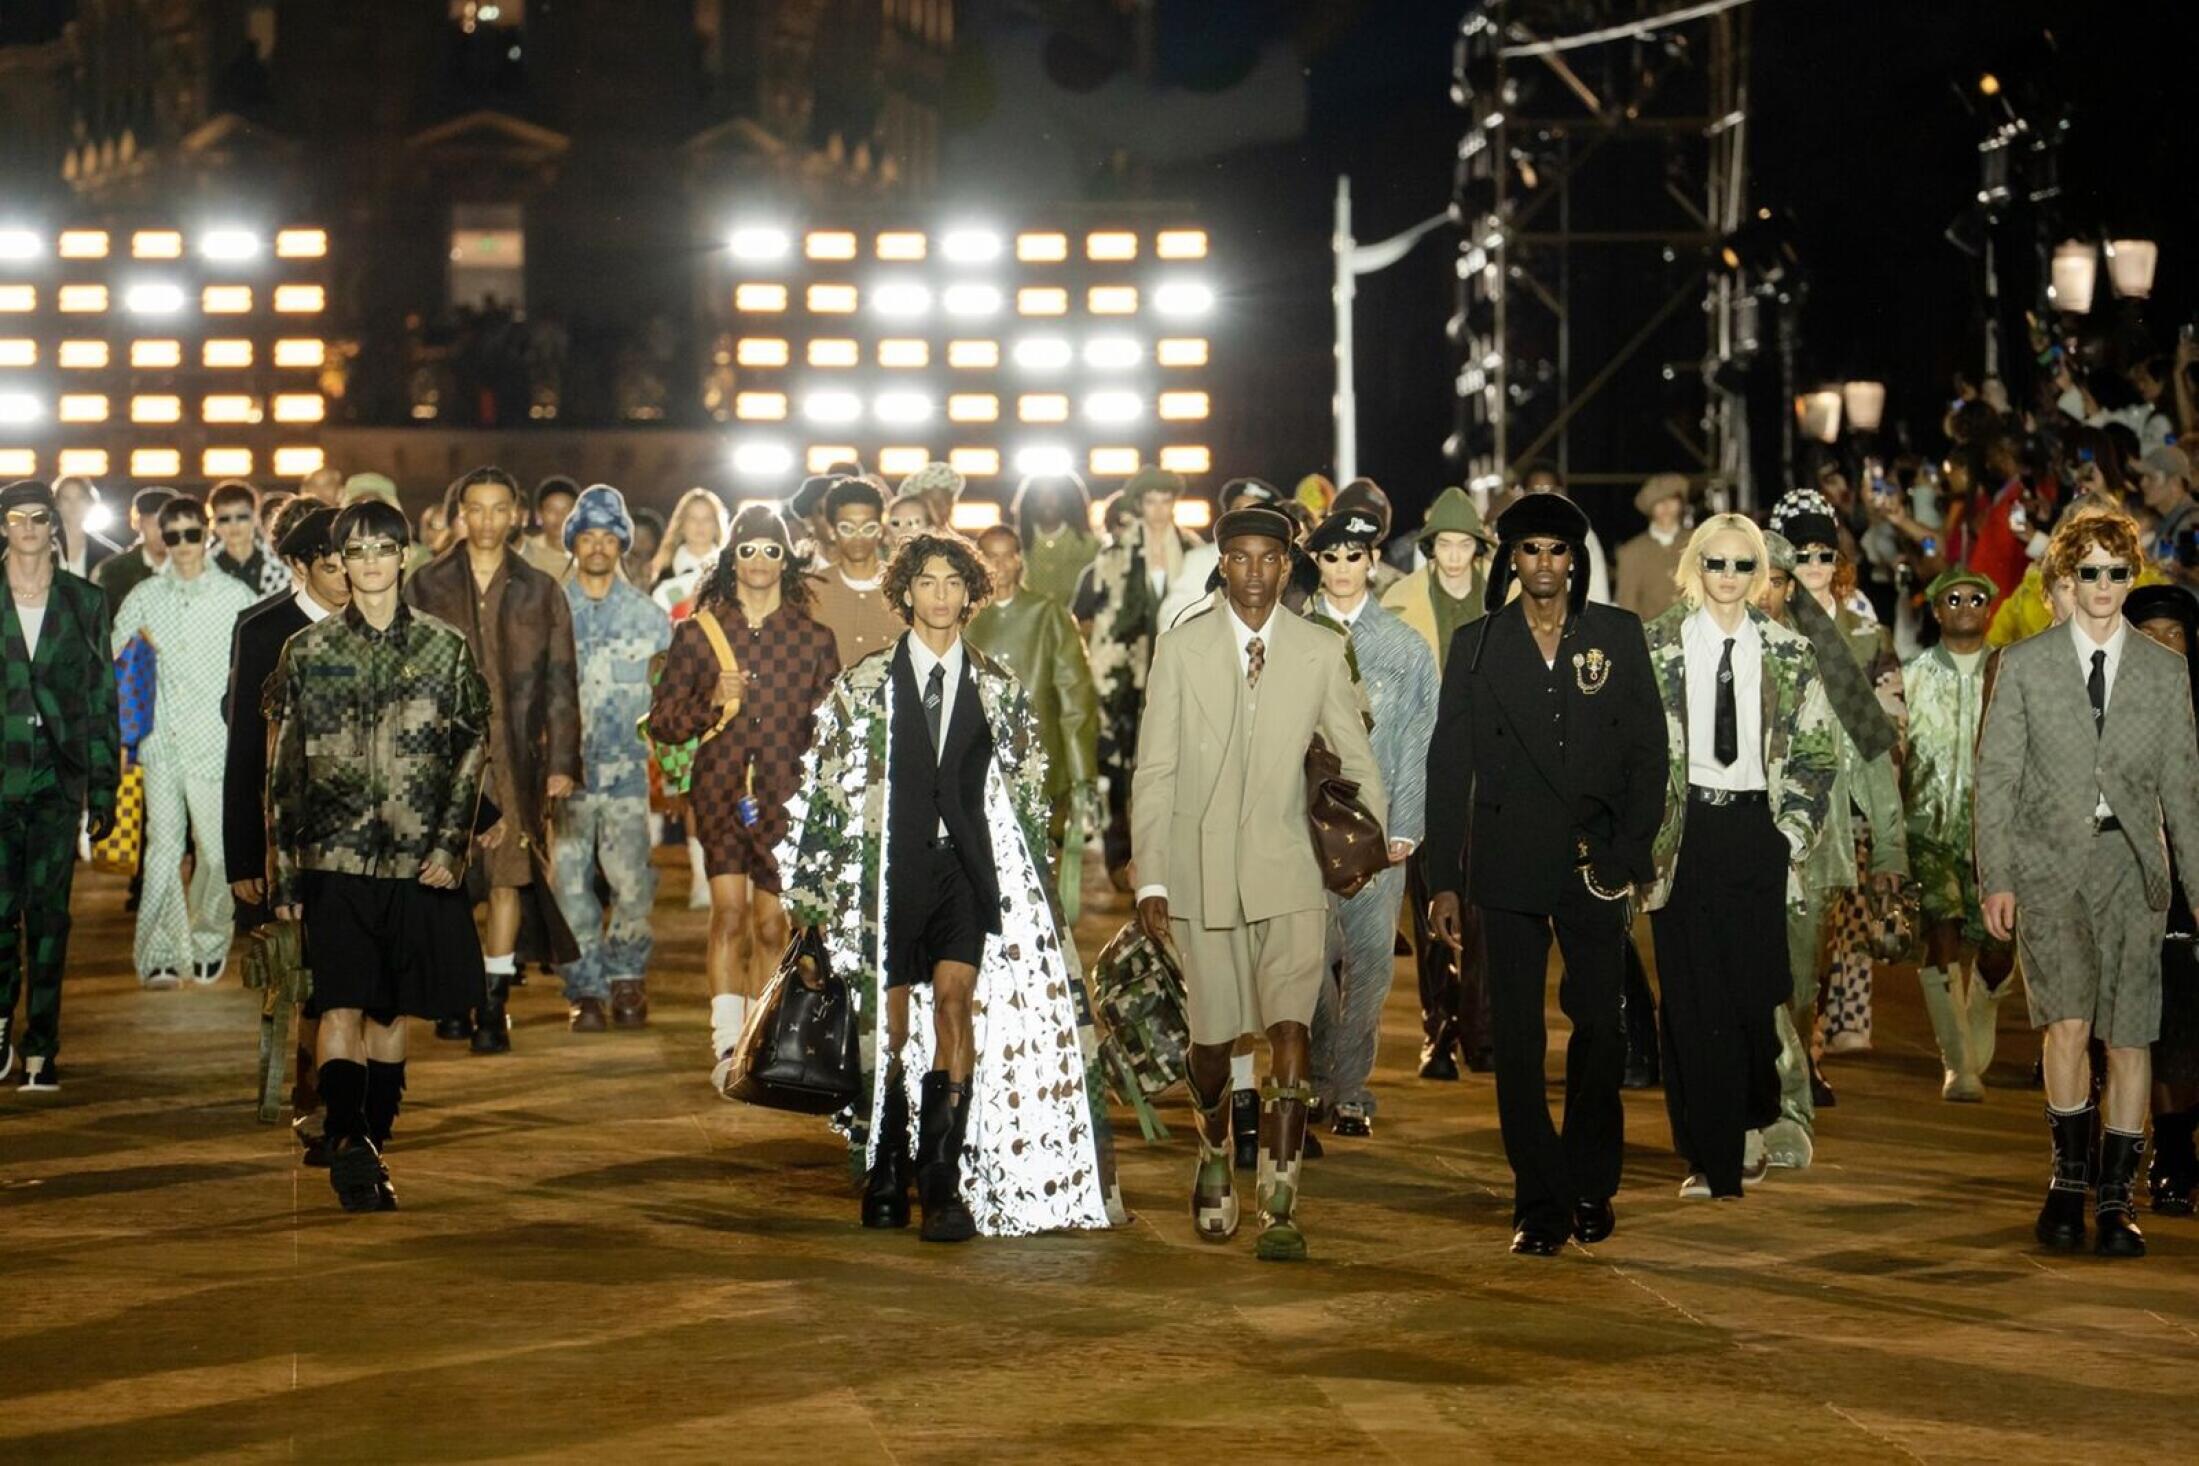 Pharrell's First Louis Vuitton Collection Is Phinally Here